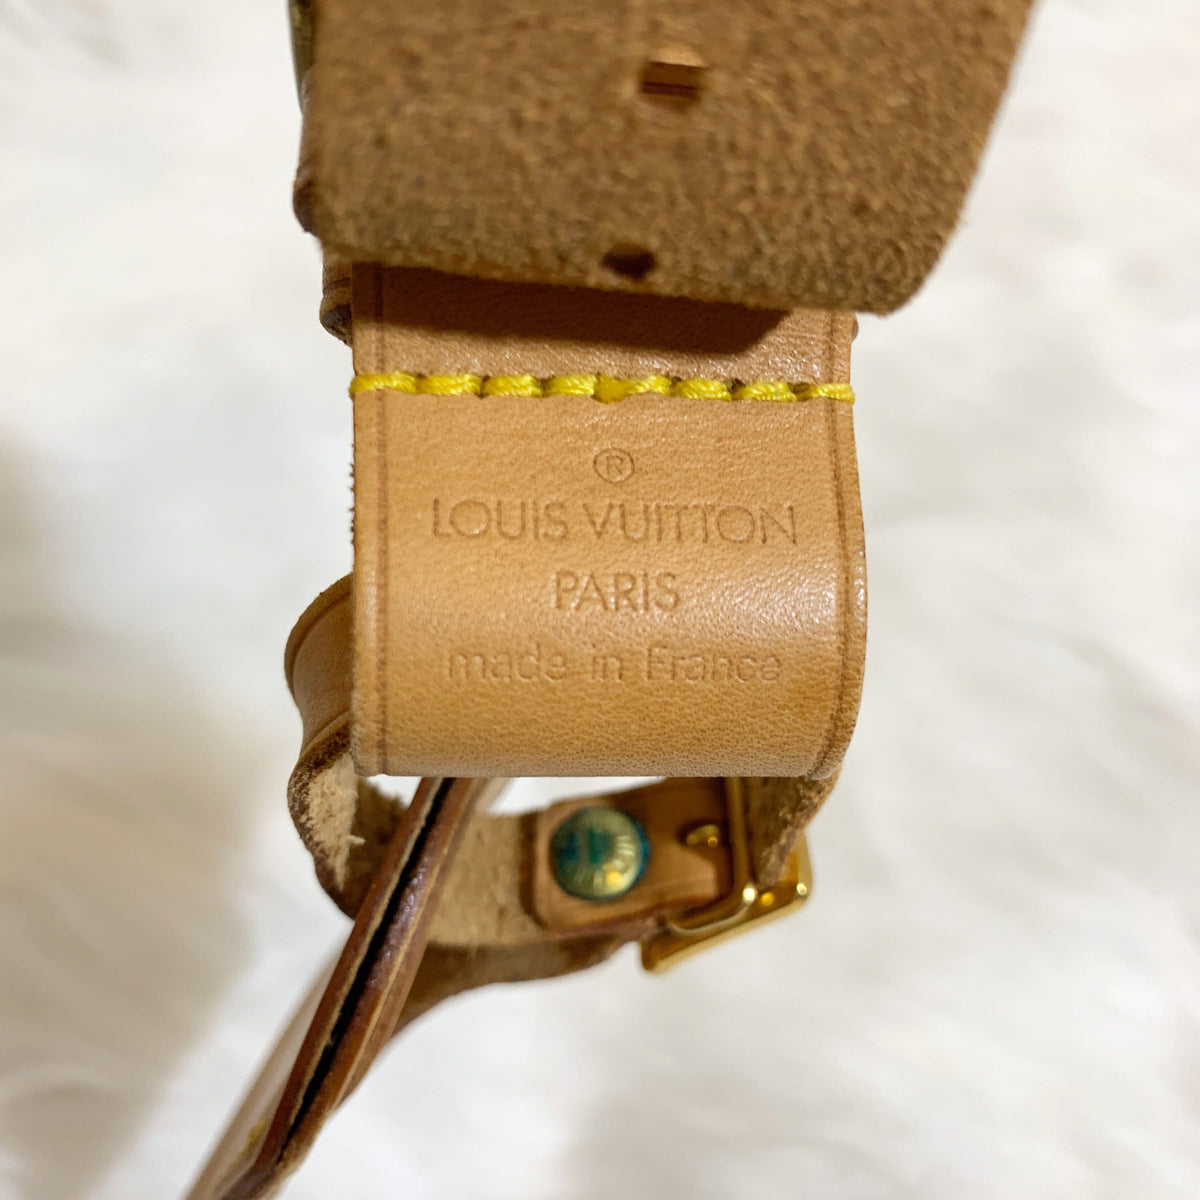 Sold at Auction: AUTHENTIC LOUIS VUITTON LEATHER LEATHER NAME TAG